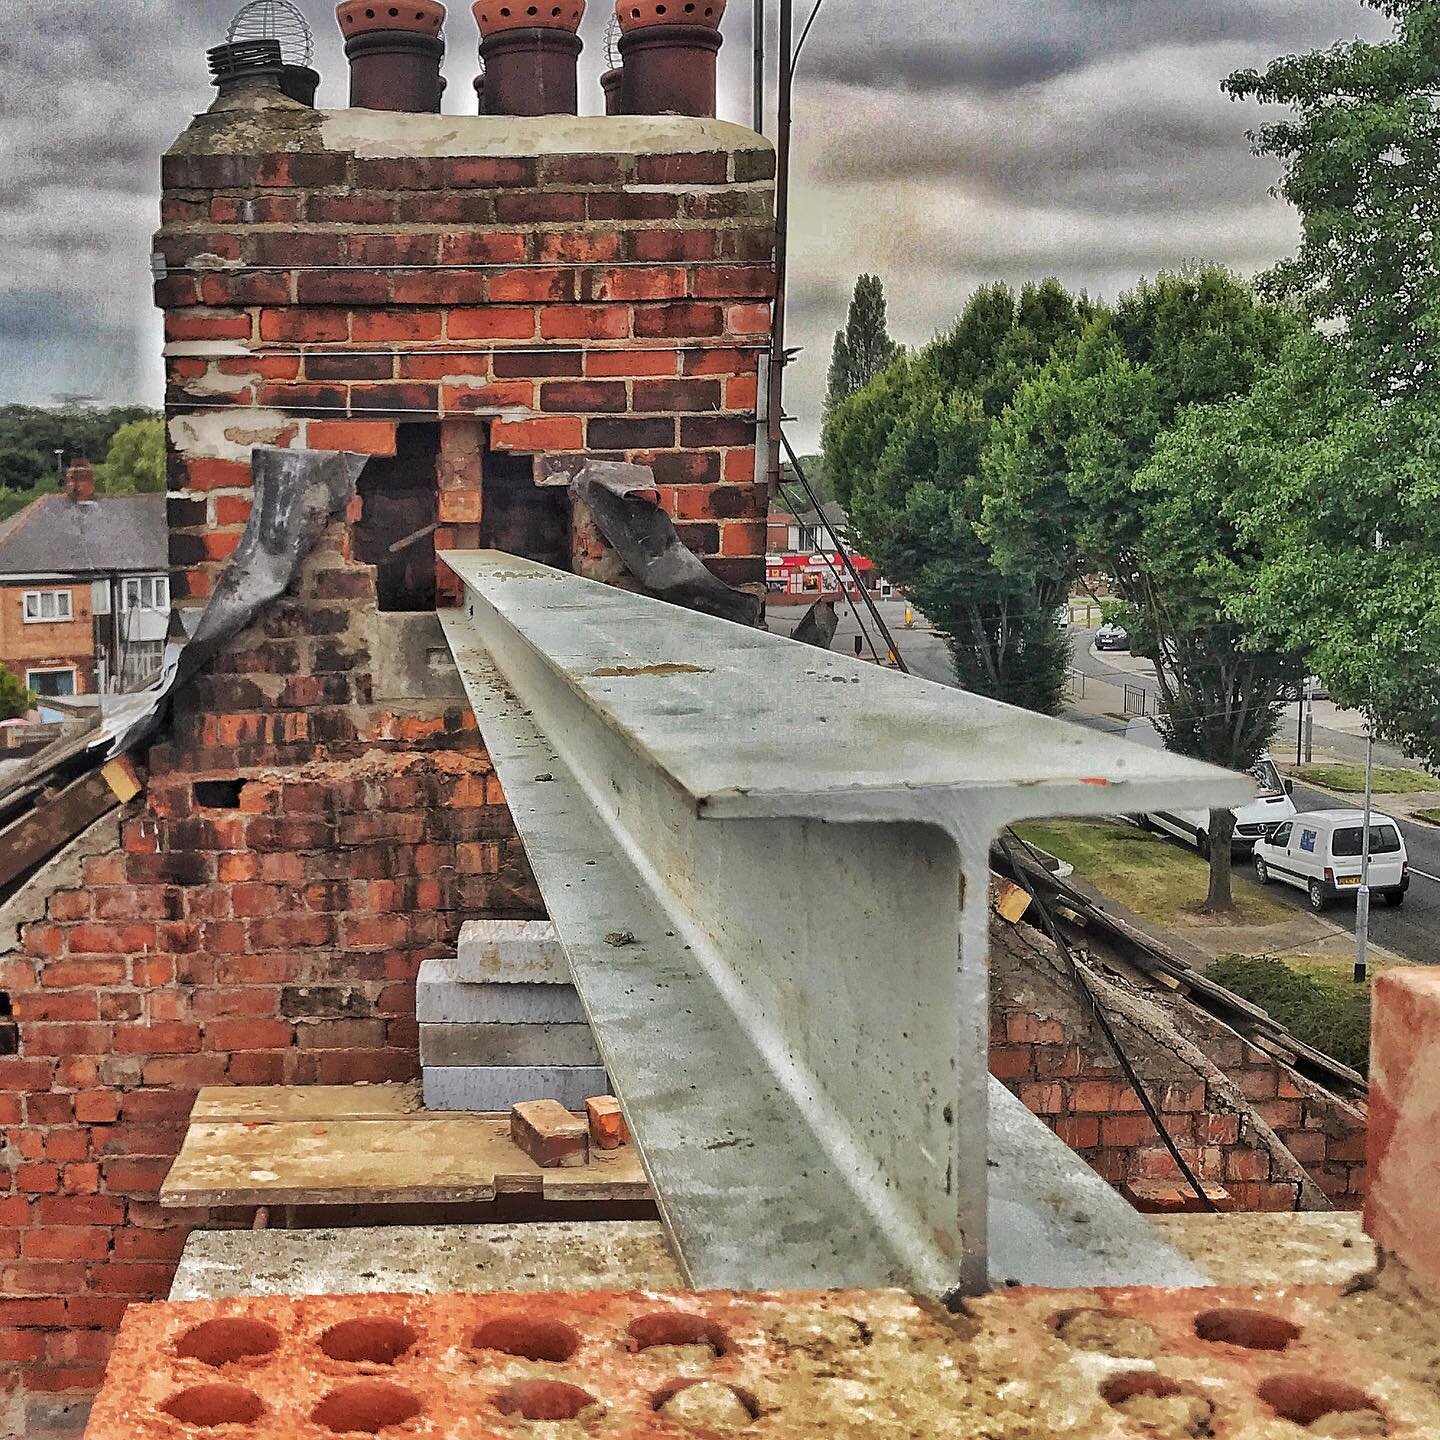 LOFT CONVERSION - Installation of a steel ridge beam. Bearing steel beams onto a working chimney stack is a no-no. But this stack has been removed up to eaves level and is supported by more steelwork below... 👌

#hull #structural #engineering #const